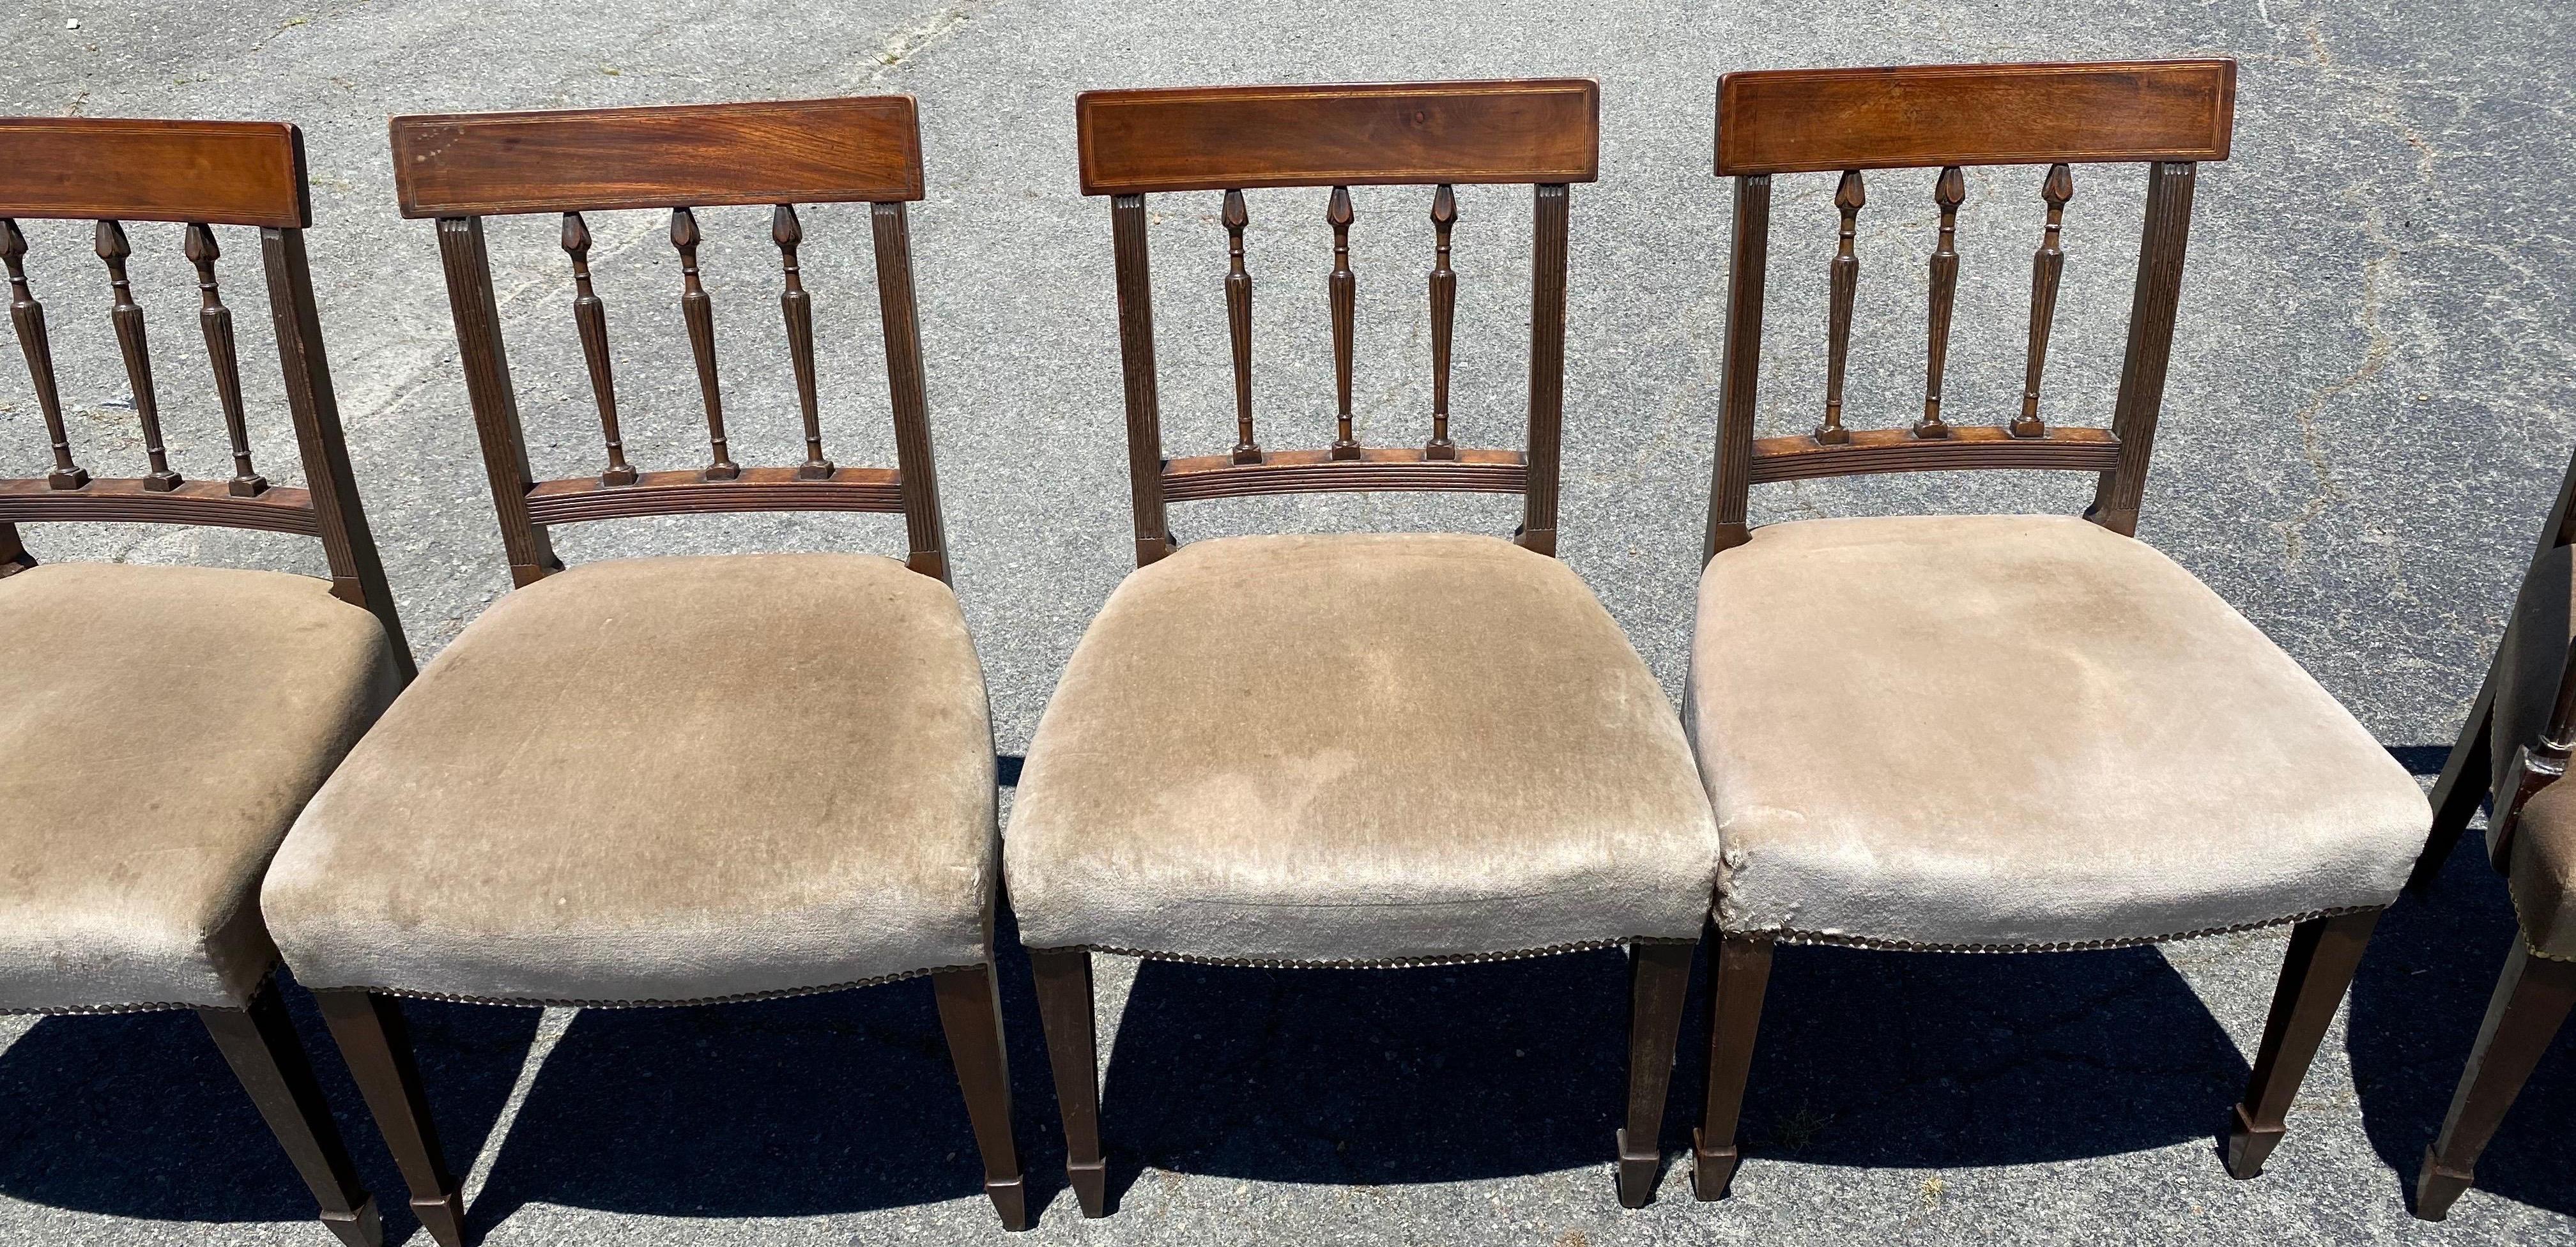 Set of 6 19th Century English Mahogany Chairs in Mohair Fabric For Sale 1